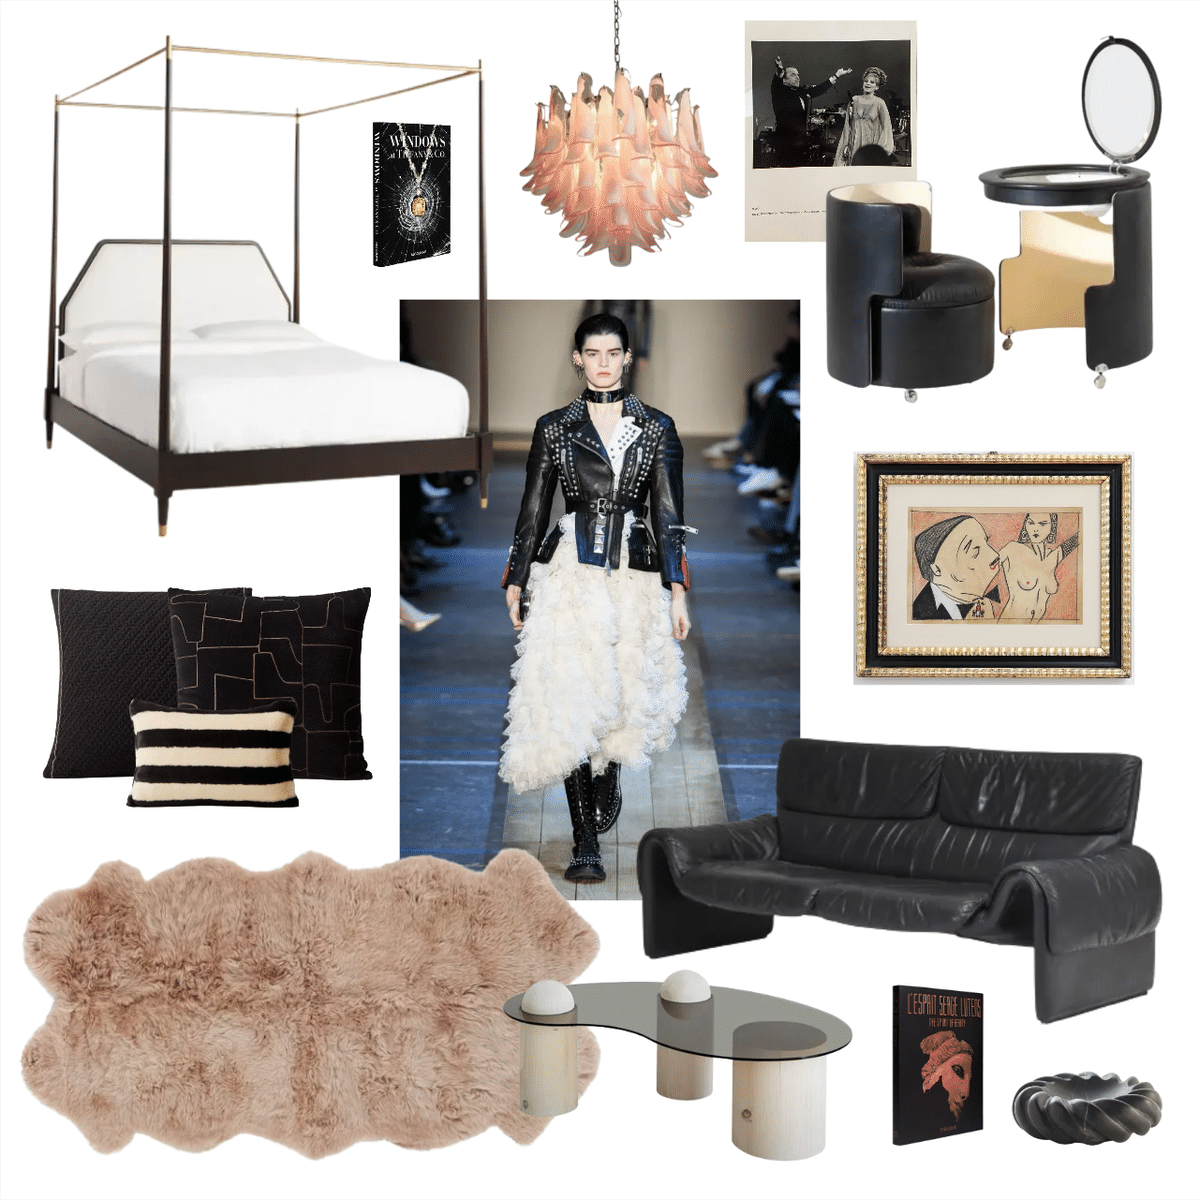 Edgy and Glam Bedroom designed by Eliza Teixeira